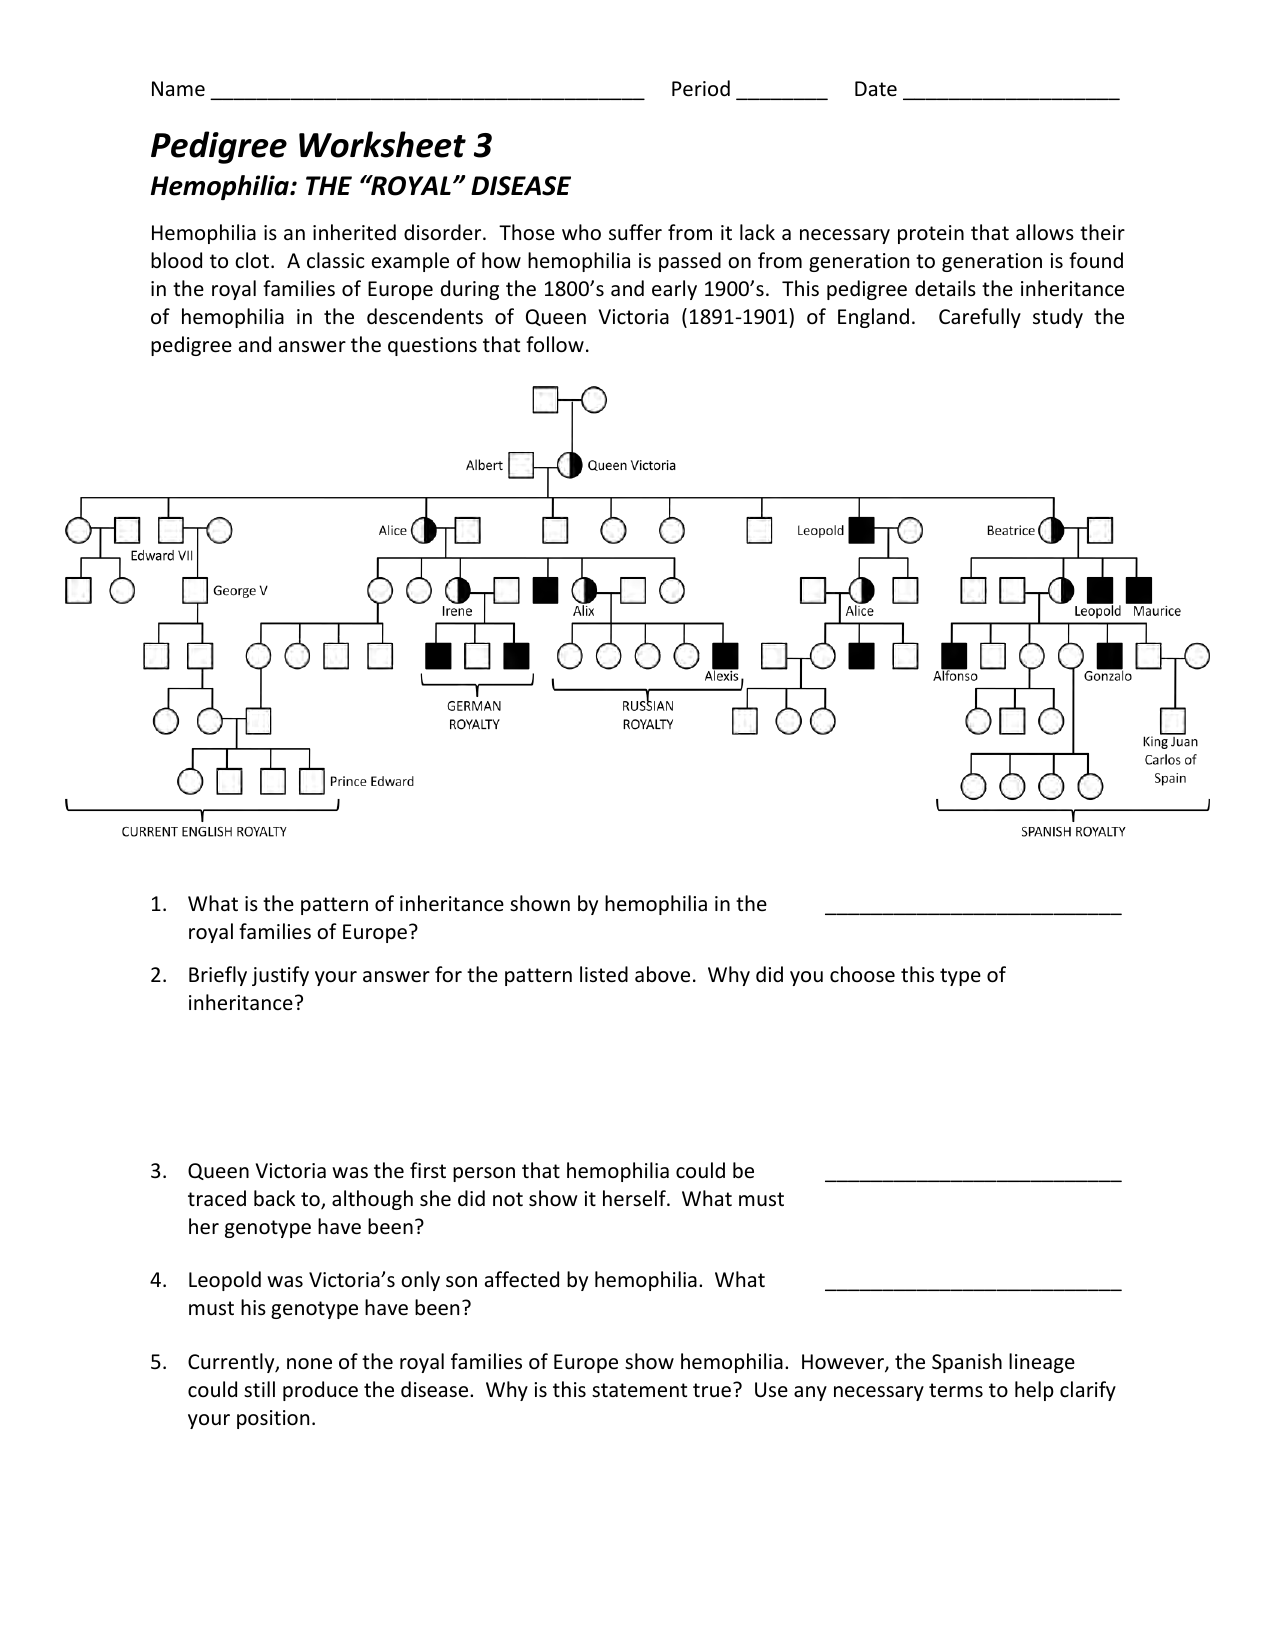 ️Pregnancy Worksheet 3 Answers Free Download Goodimg co